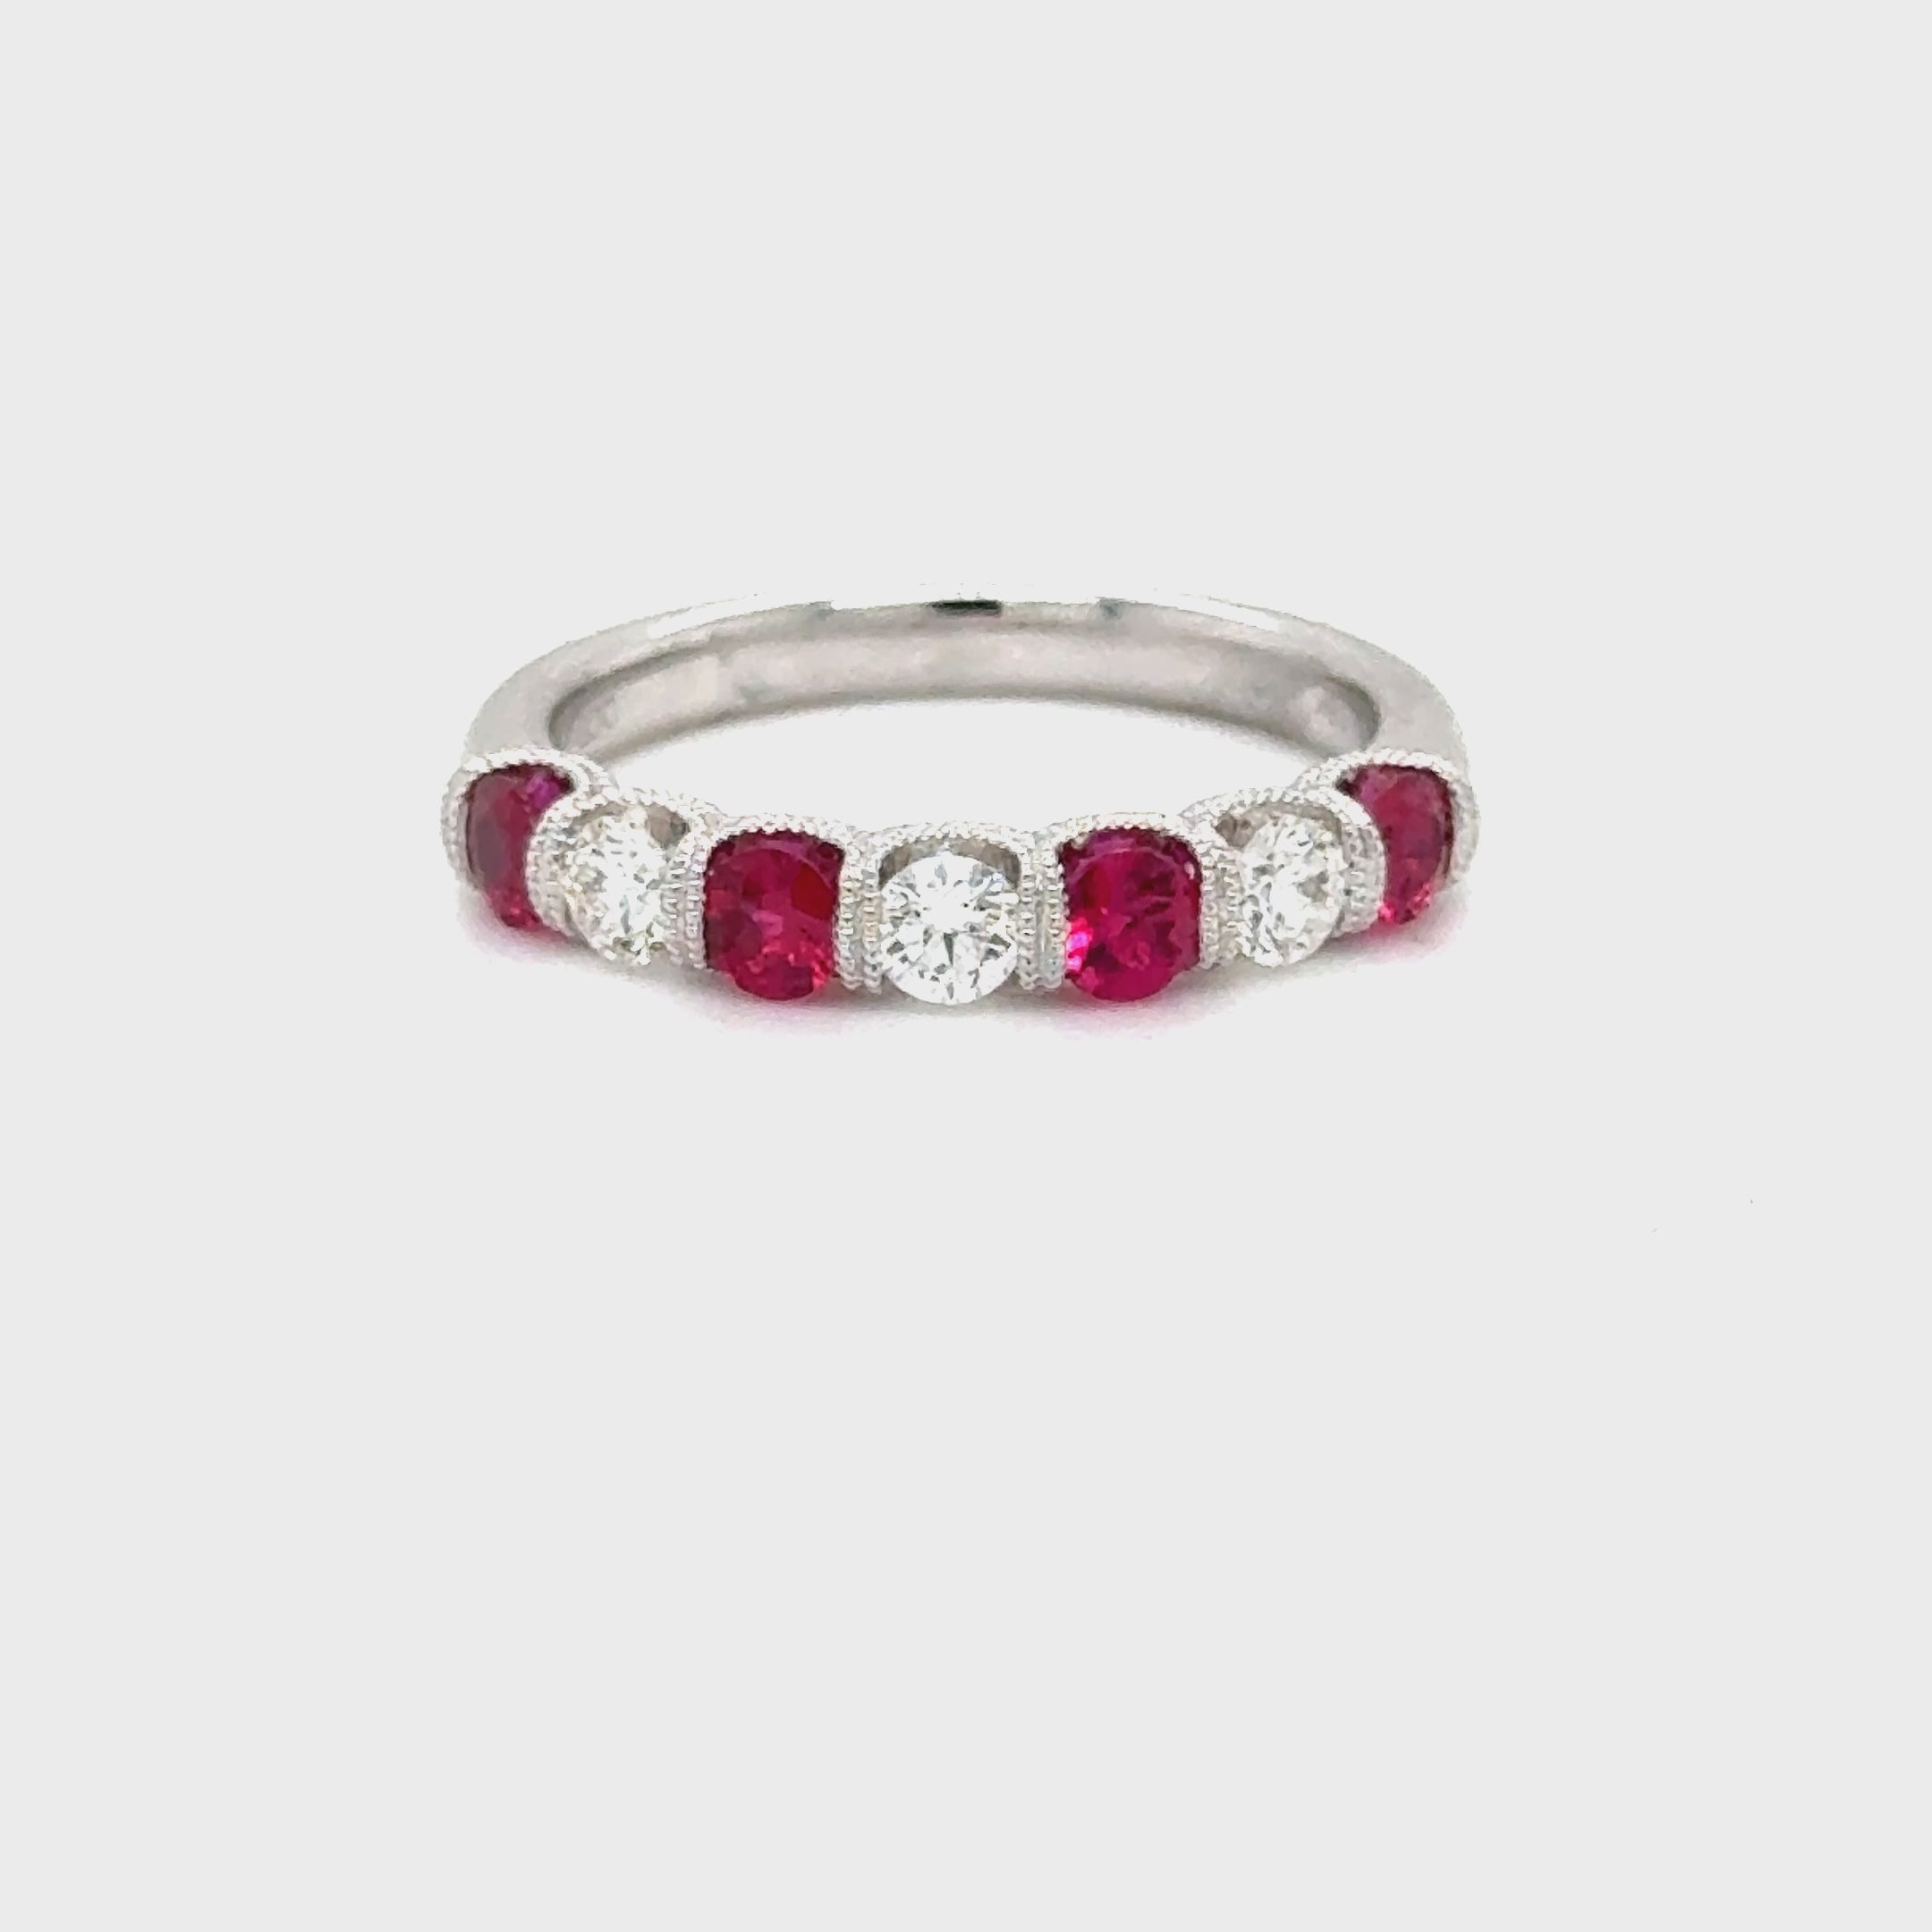 Ruby and Diamond Band at Regard Jewelry in Austin, Texas